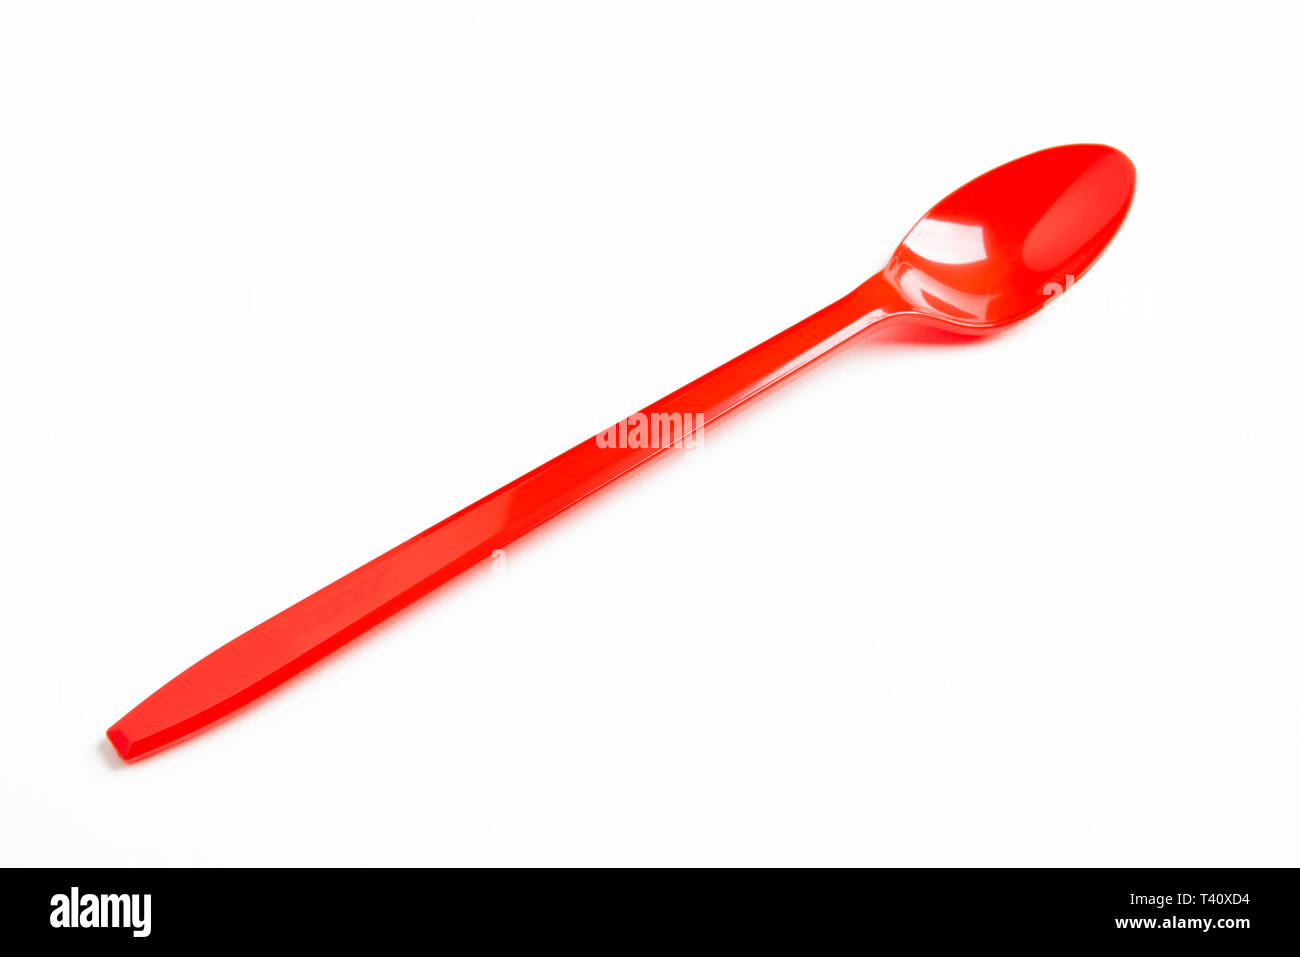 A red shiny long plastic spoon artistically set on a plain white background with negative spaces. Stock Photo